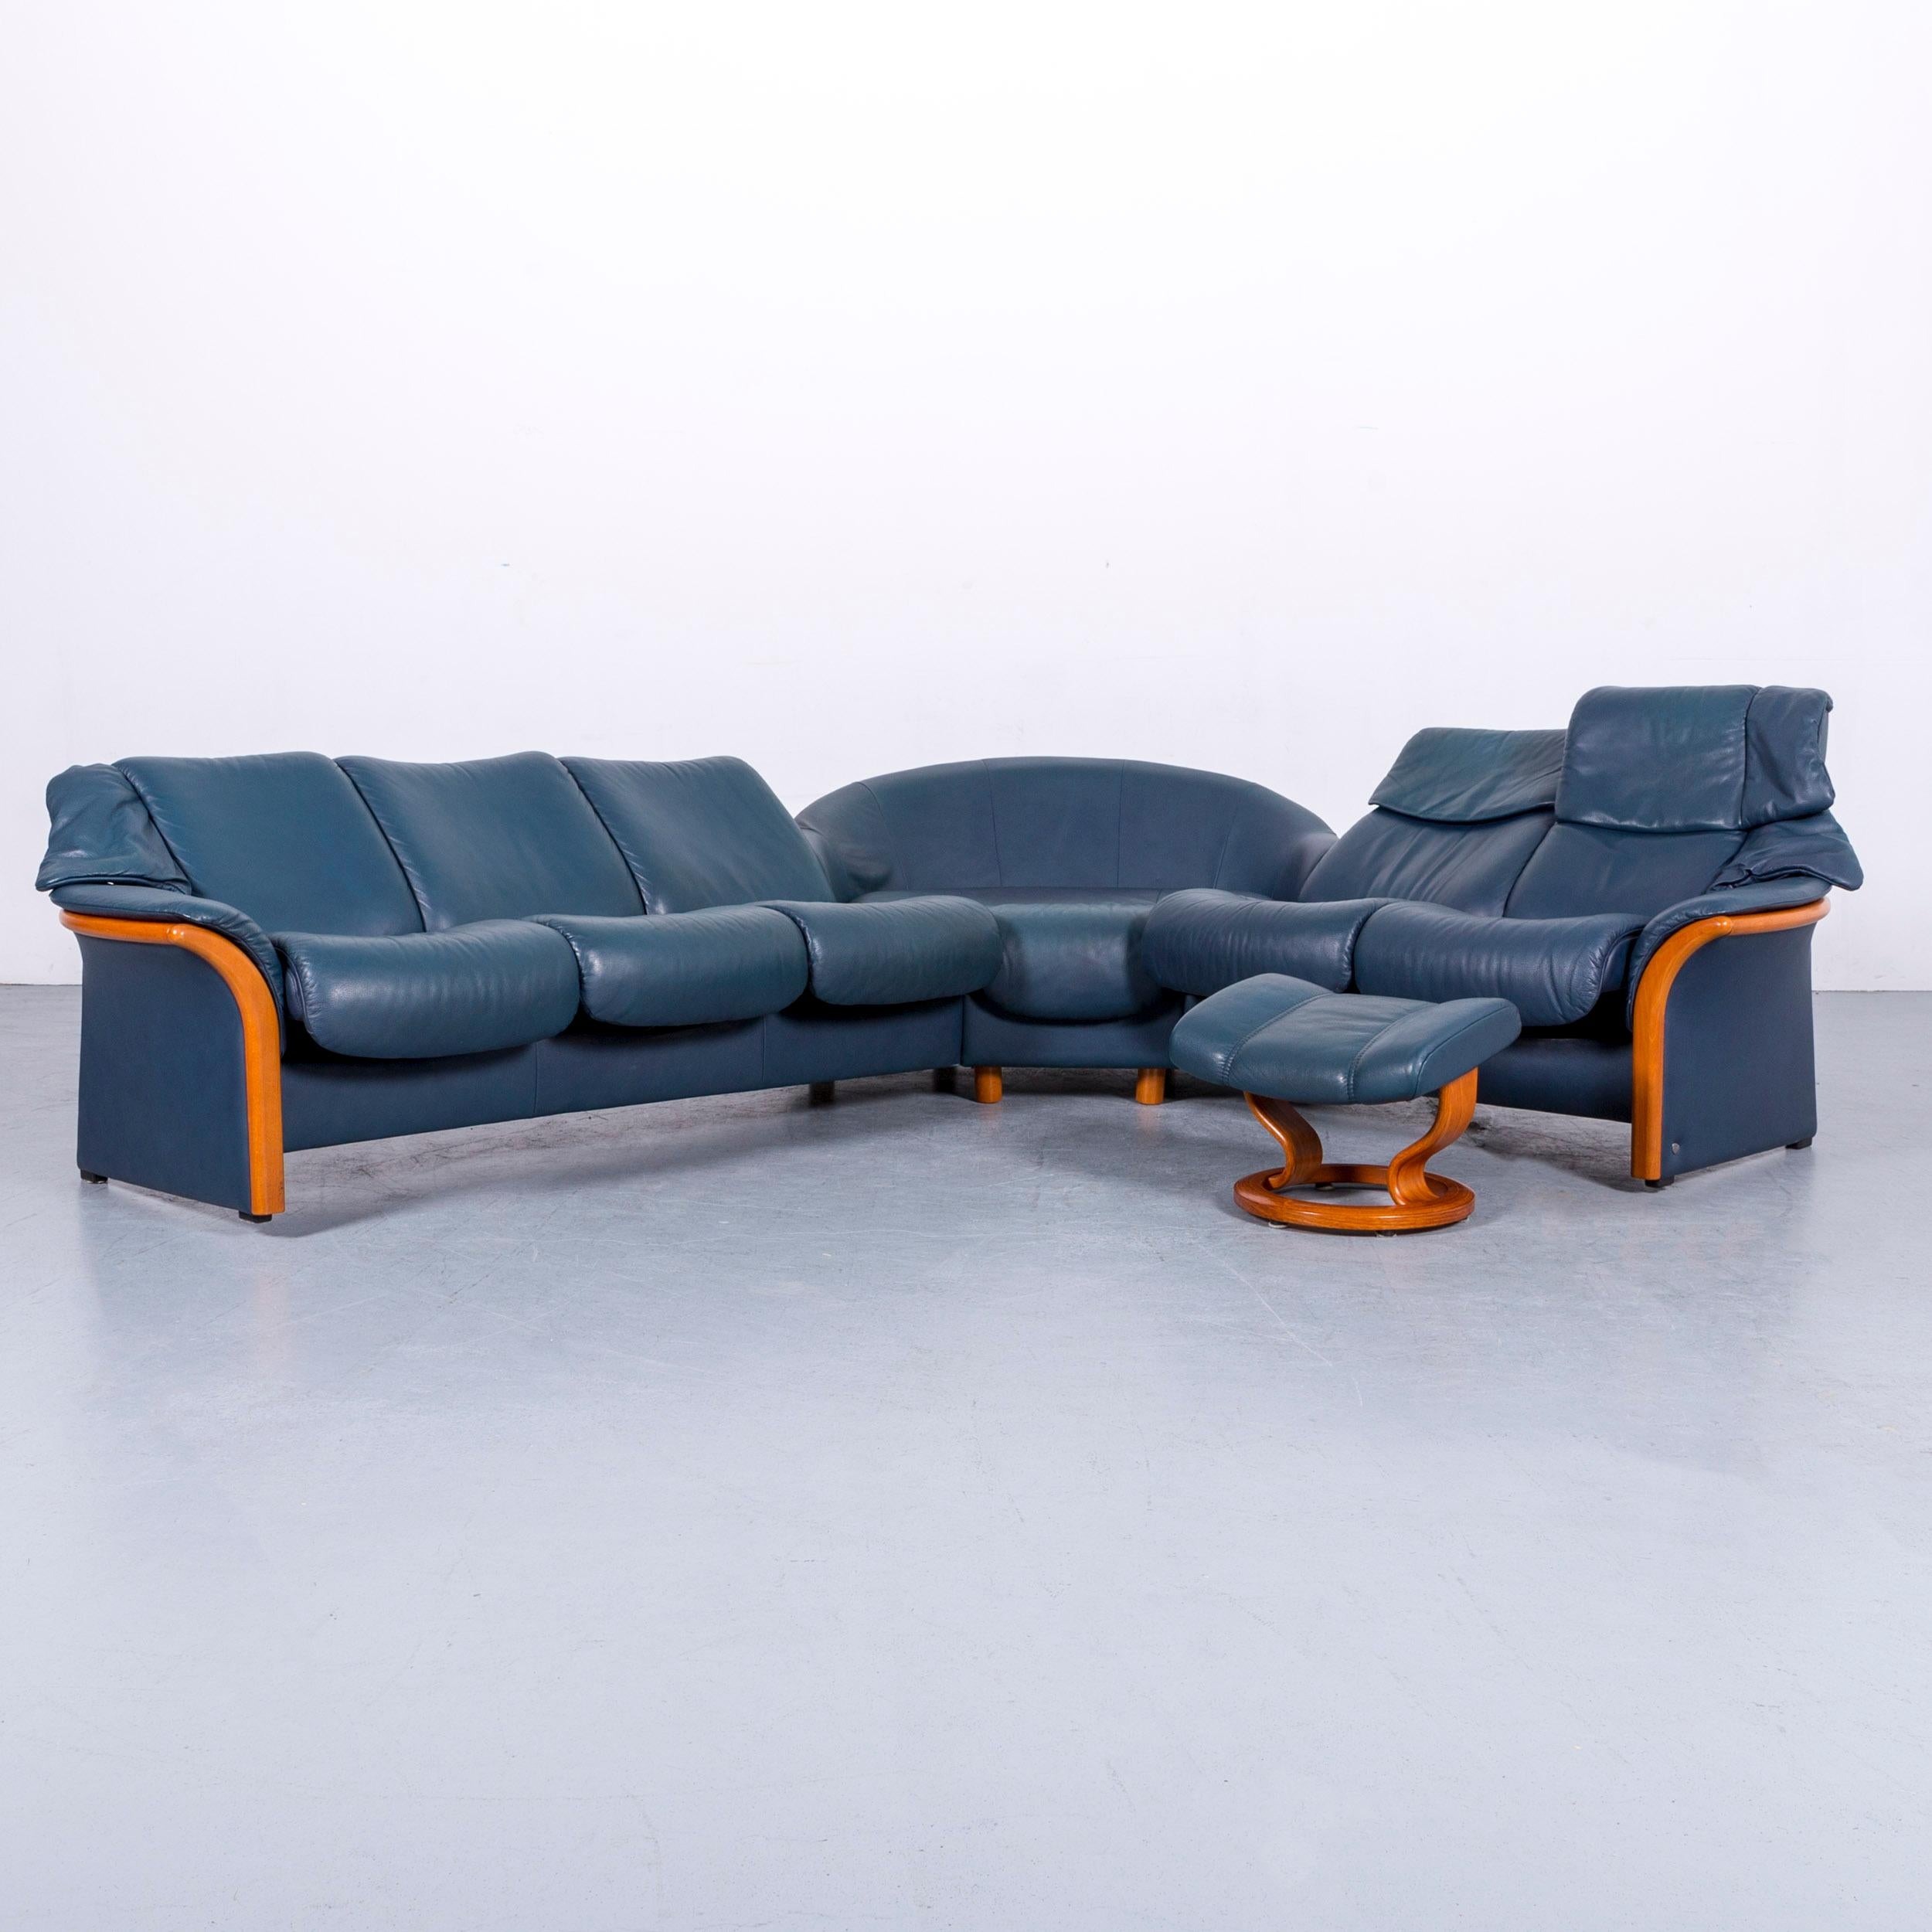 We bring to you an Ekornes Stressless leather corner sofa blue and foot-stool.